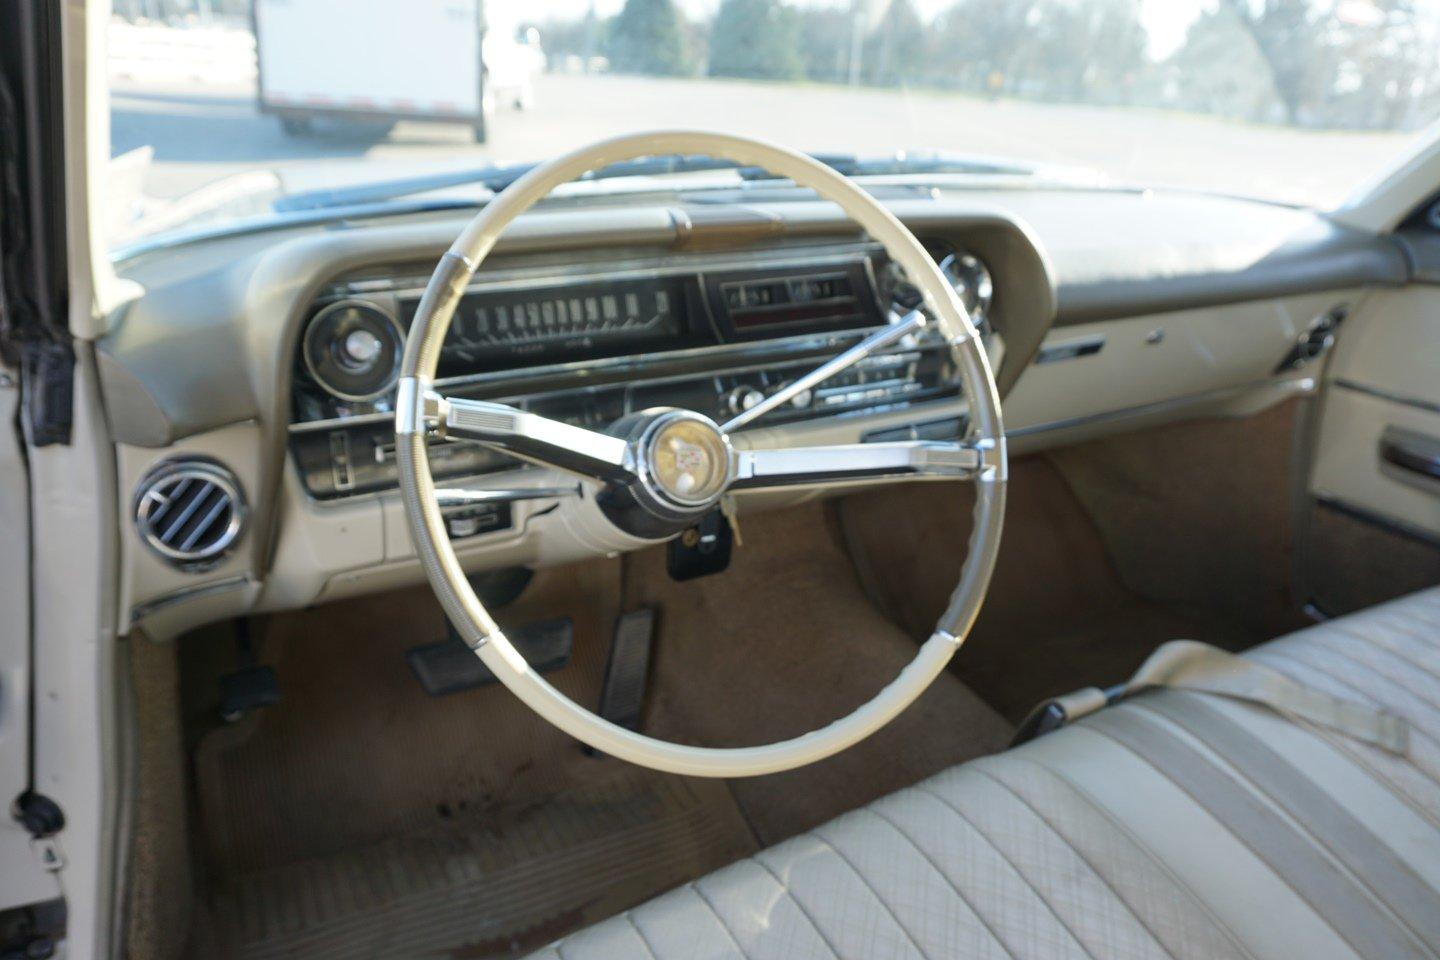 1964 Cadillac Sixty-Two 2-Door Coupe, 429 V-8 Gas Engine, 3-Speed Automatic Transmission, Factory Ai